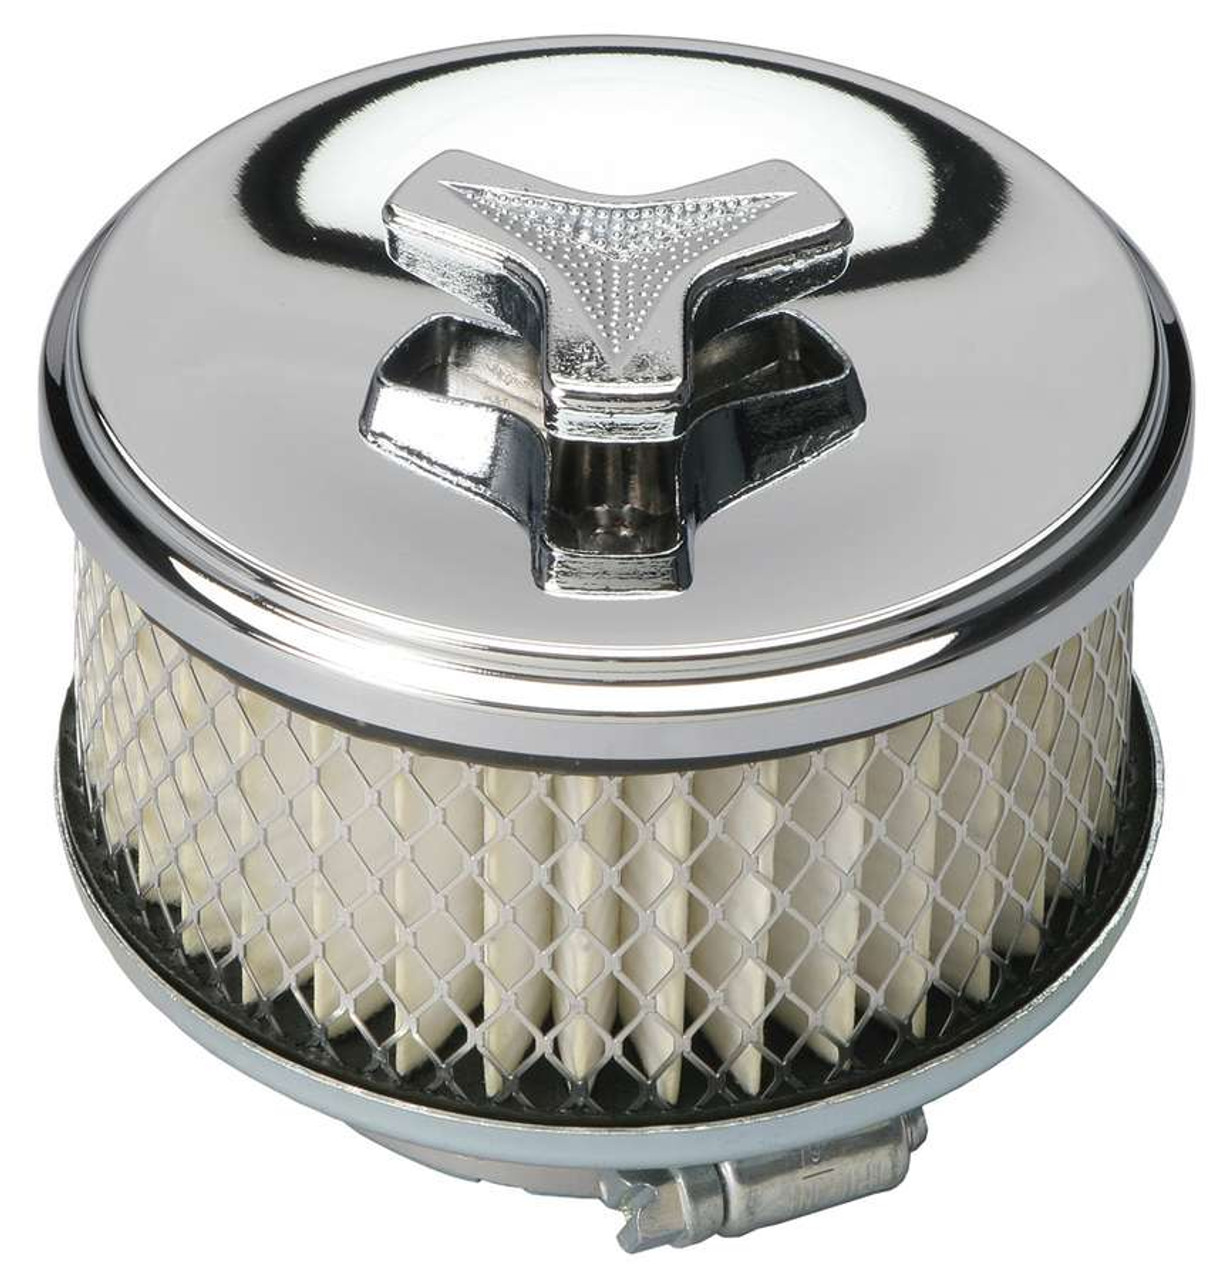 Trans-Dapt 4in Deep Dish Air Cleaner - TRA2170